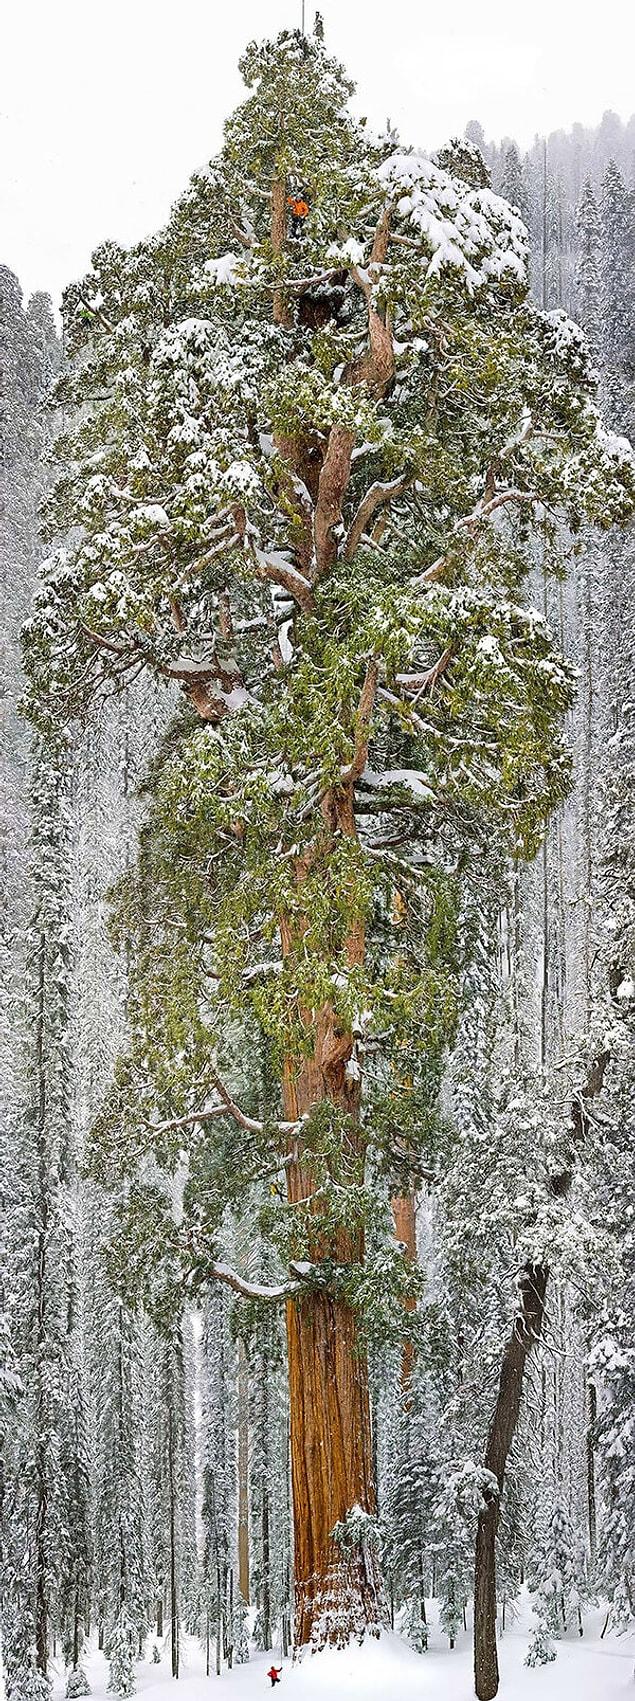 10. The President, third largest Giant Sequoia tree in the world, California